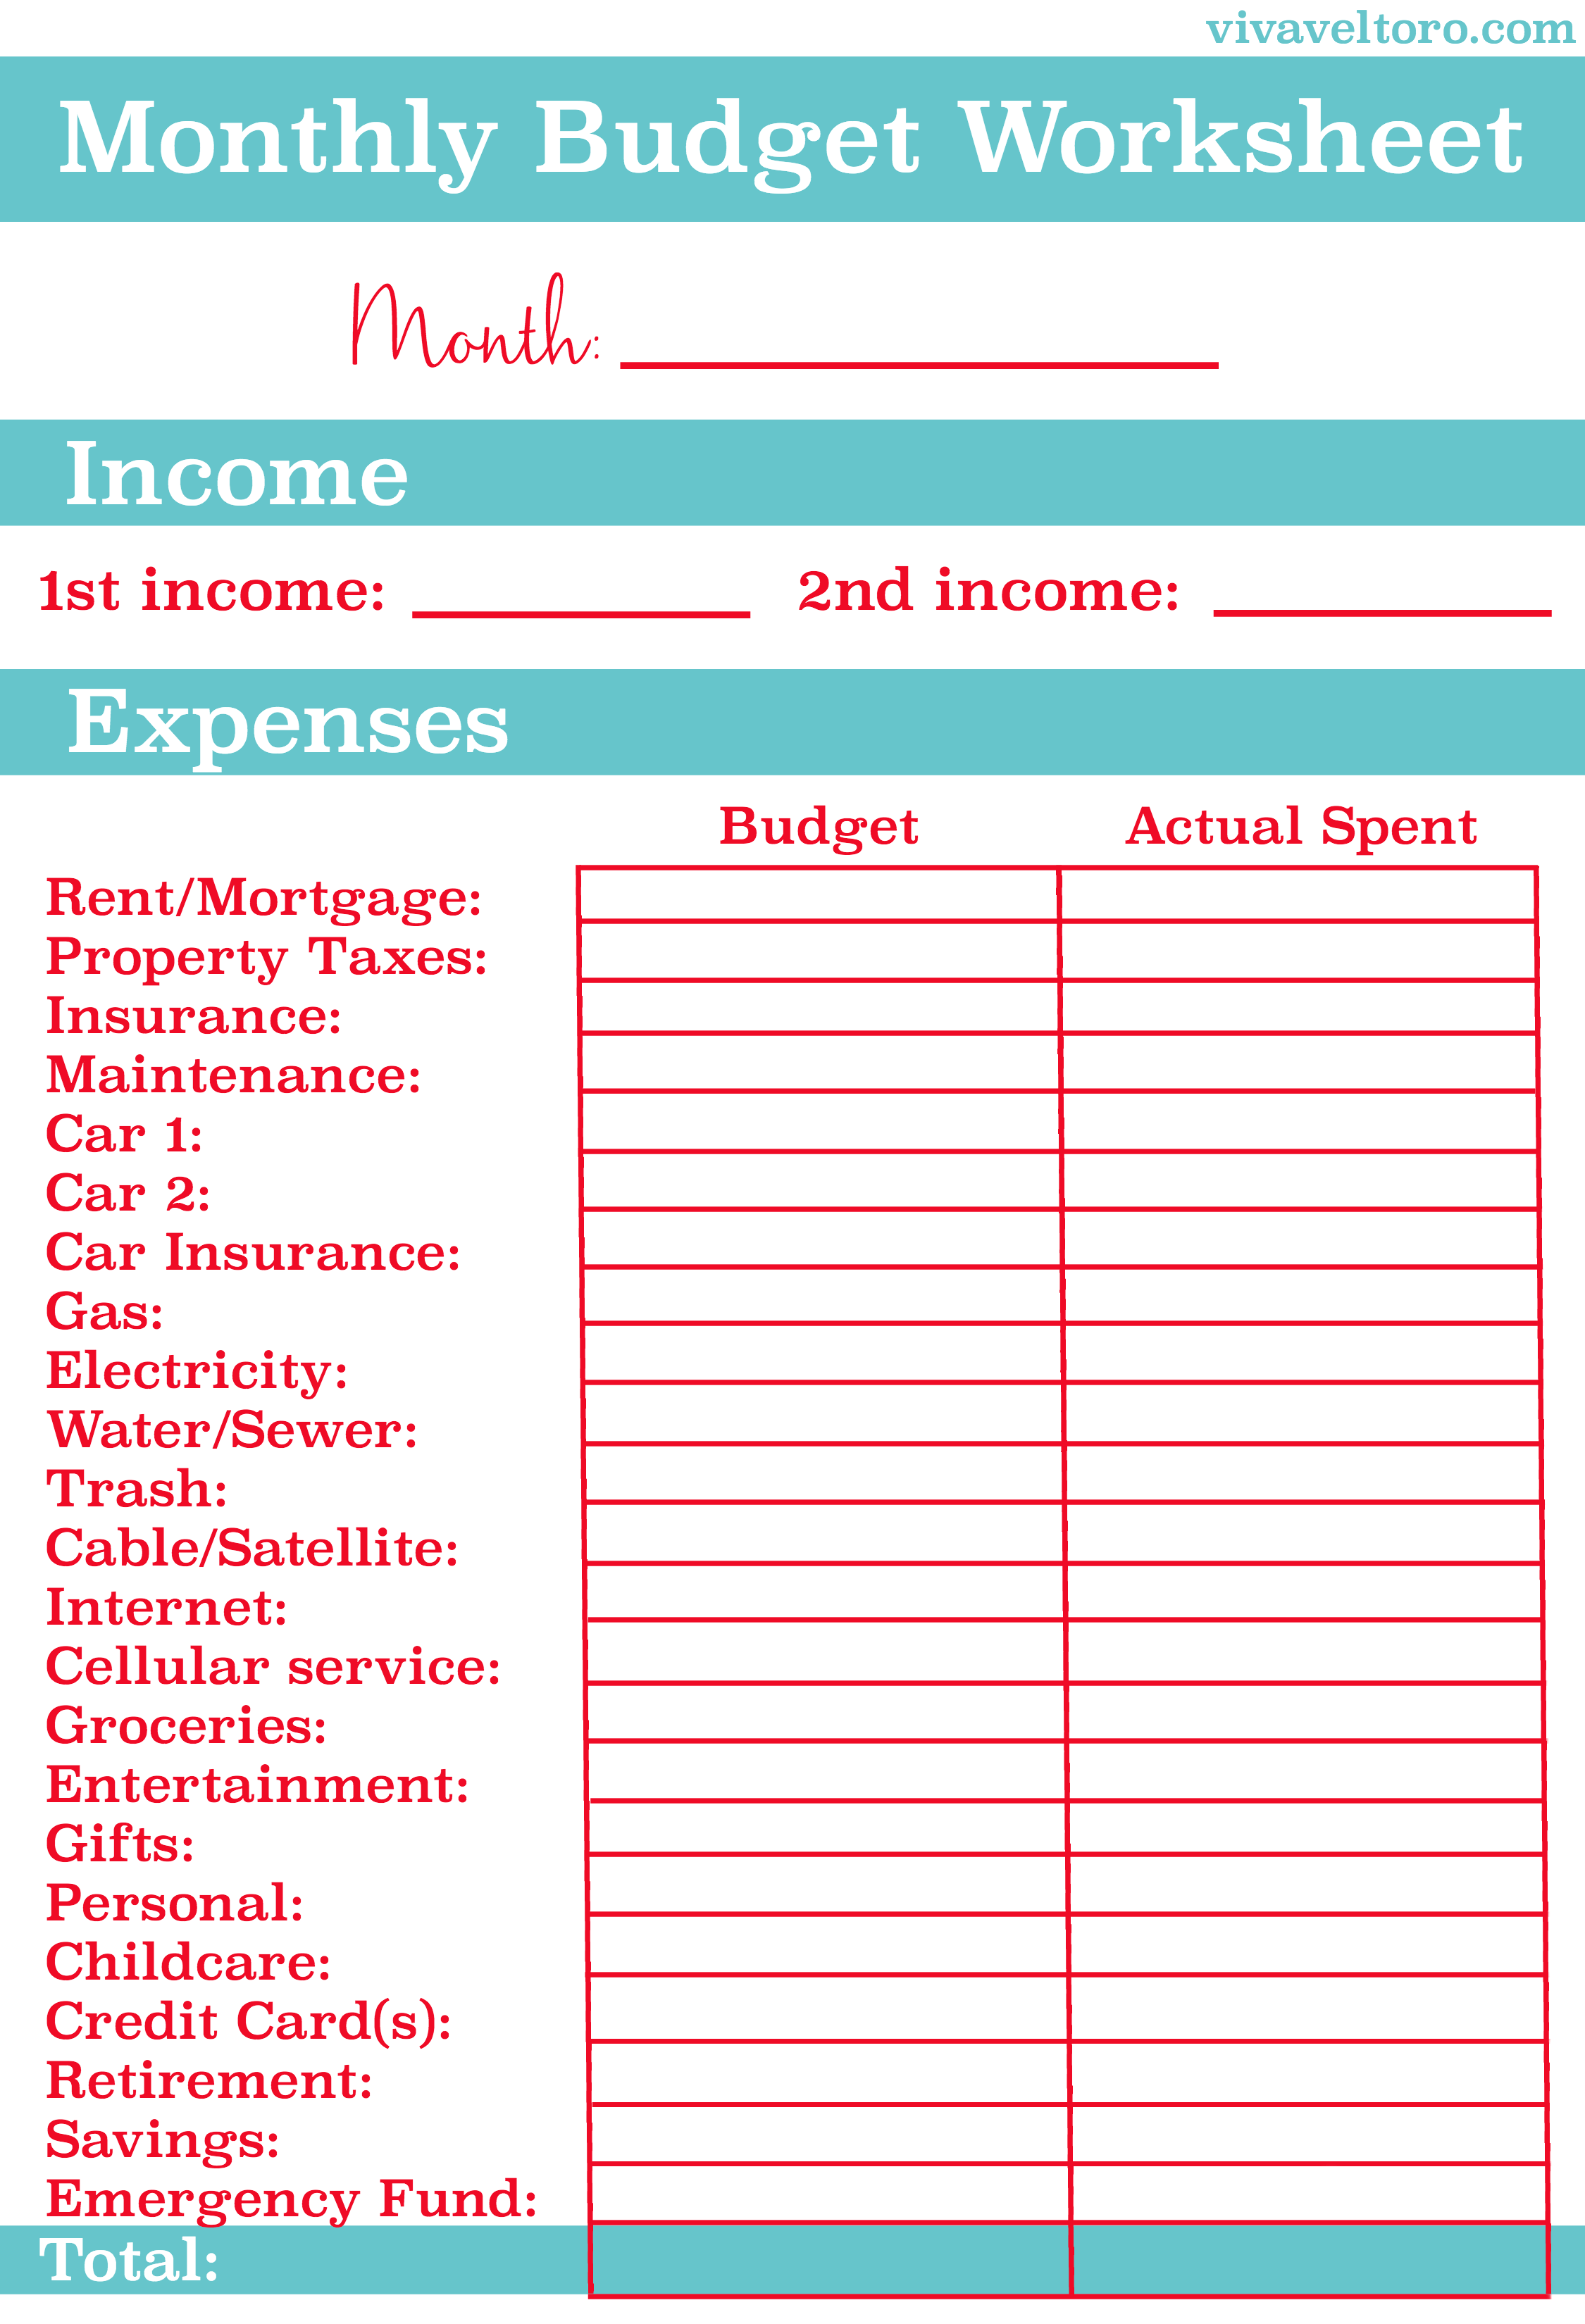 Monthly budget worksheet template free